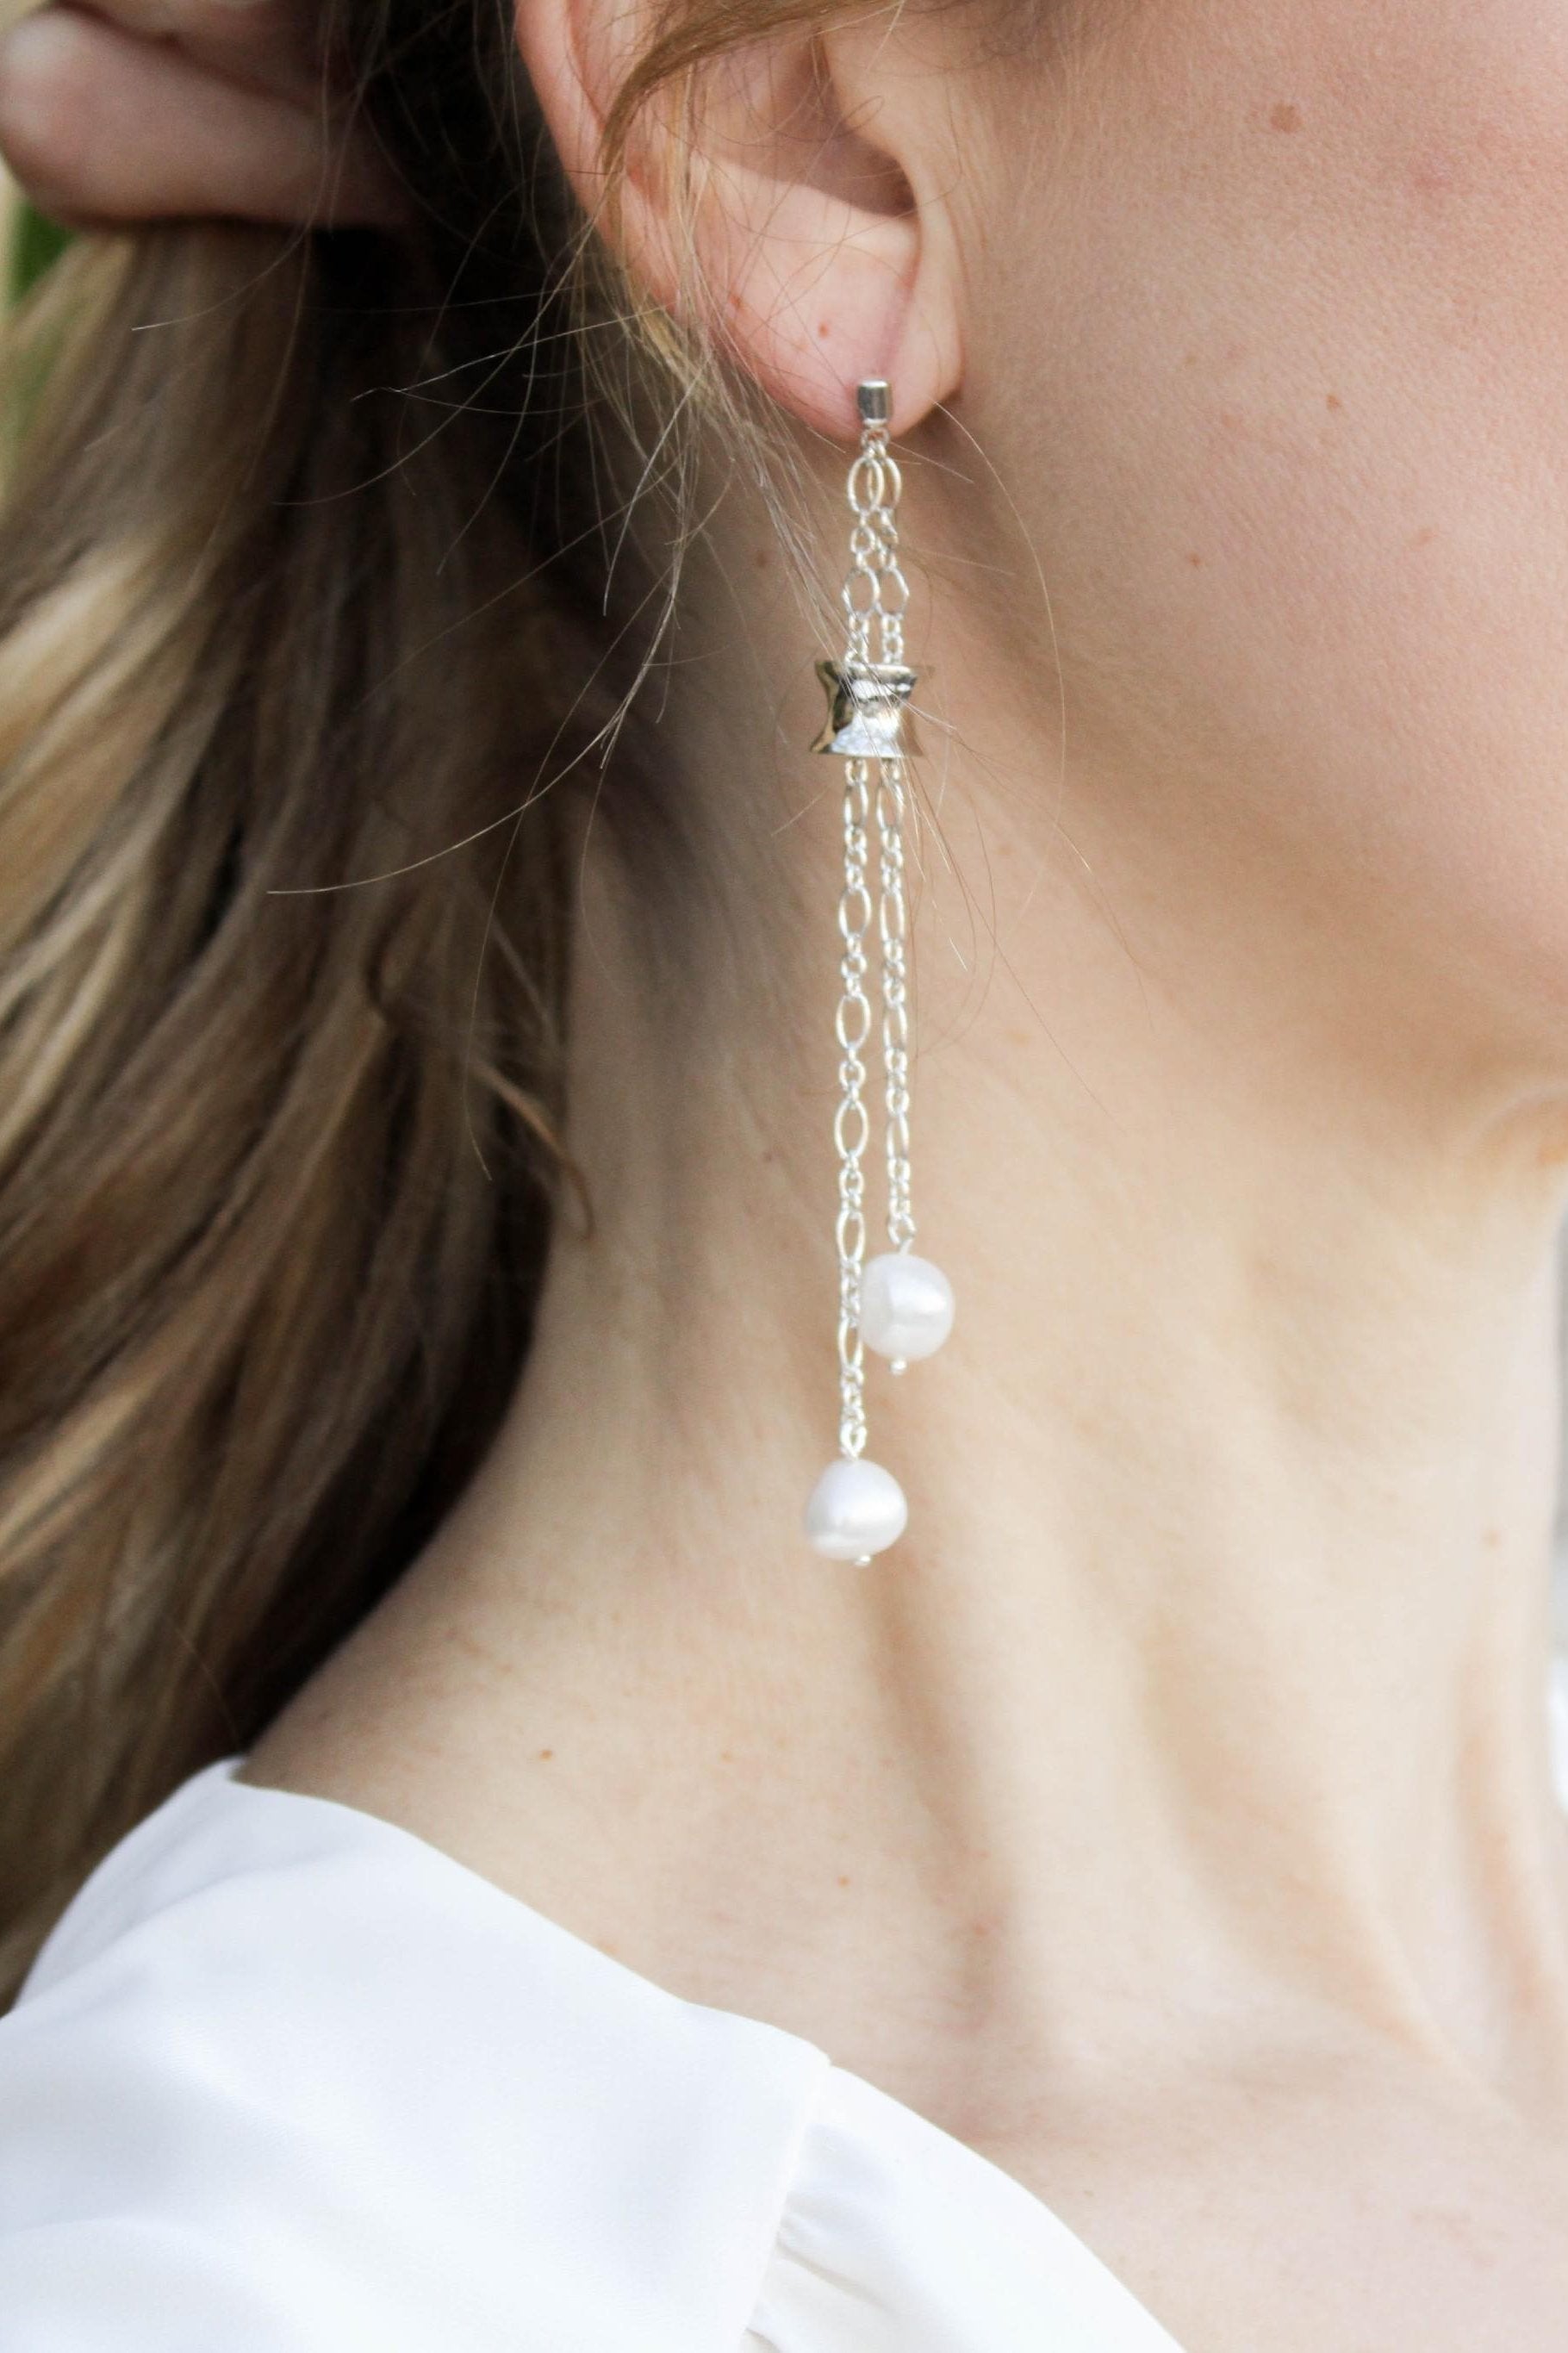 Baroque Pearl Earrings in Double Silver Chain and Handmade Solid Silver Bead with Diamond-The Diamond Setter